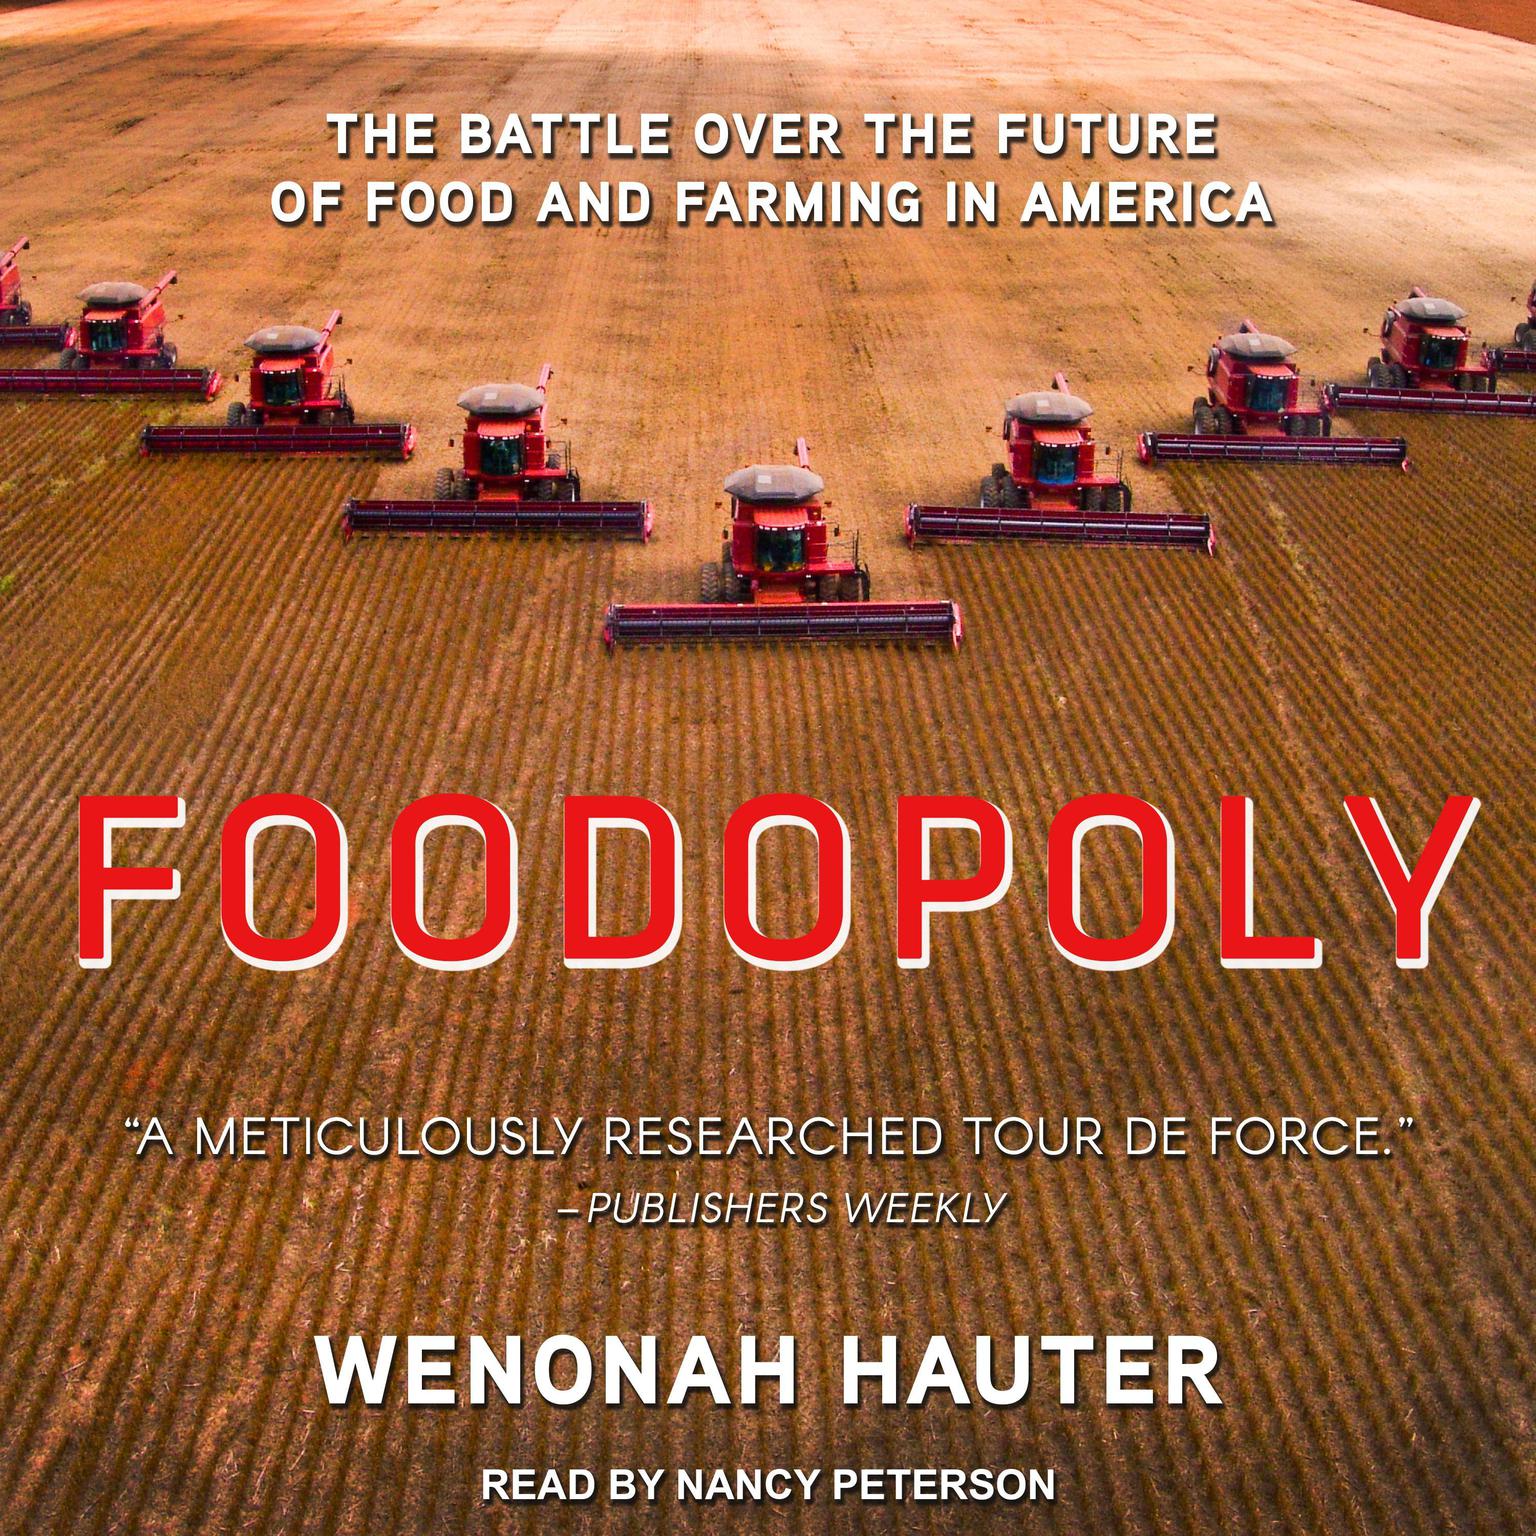 Foodopoly: The Battle Over the Future of Food and Farming in America Audiobook, by Wenonah Hauter